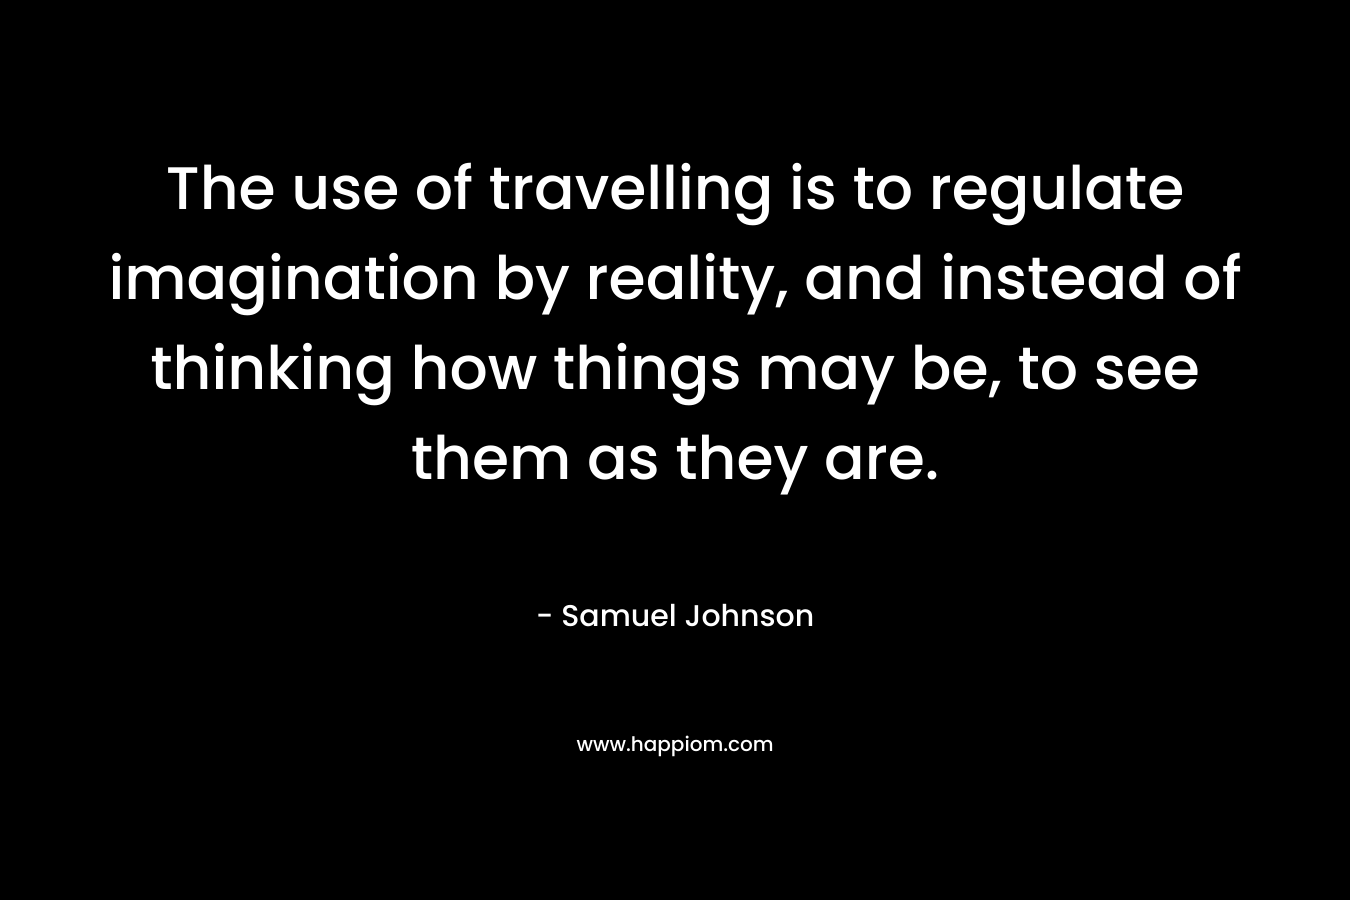 The use of travelling is to regulate imagination by reality, and instead of thinking how things may be, to see them as they are. – Samuel Johnson